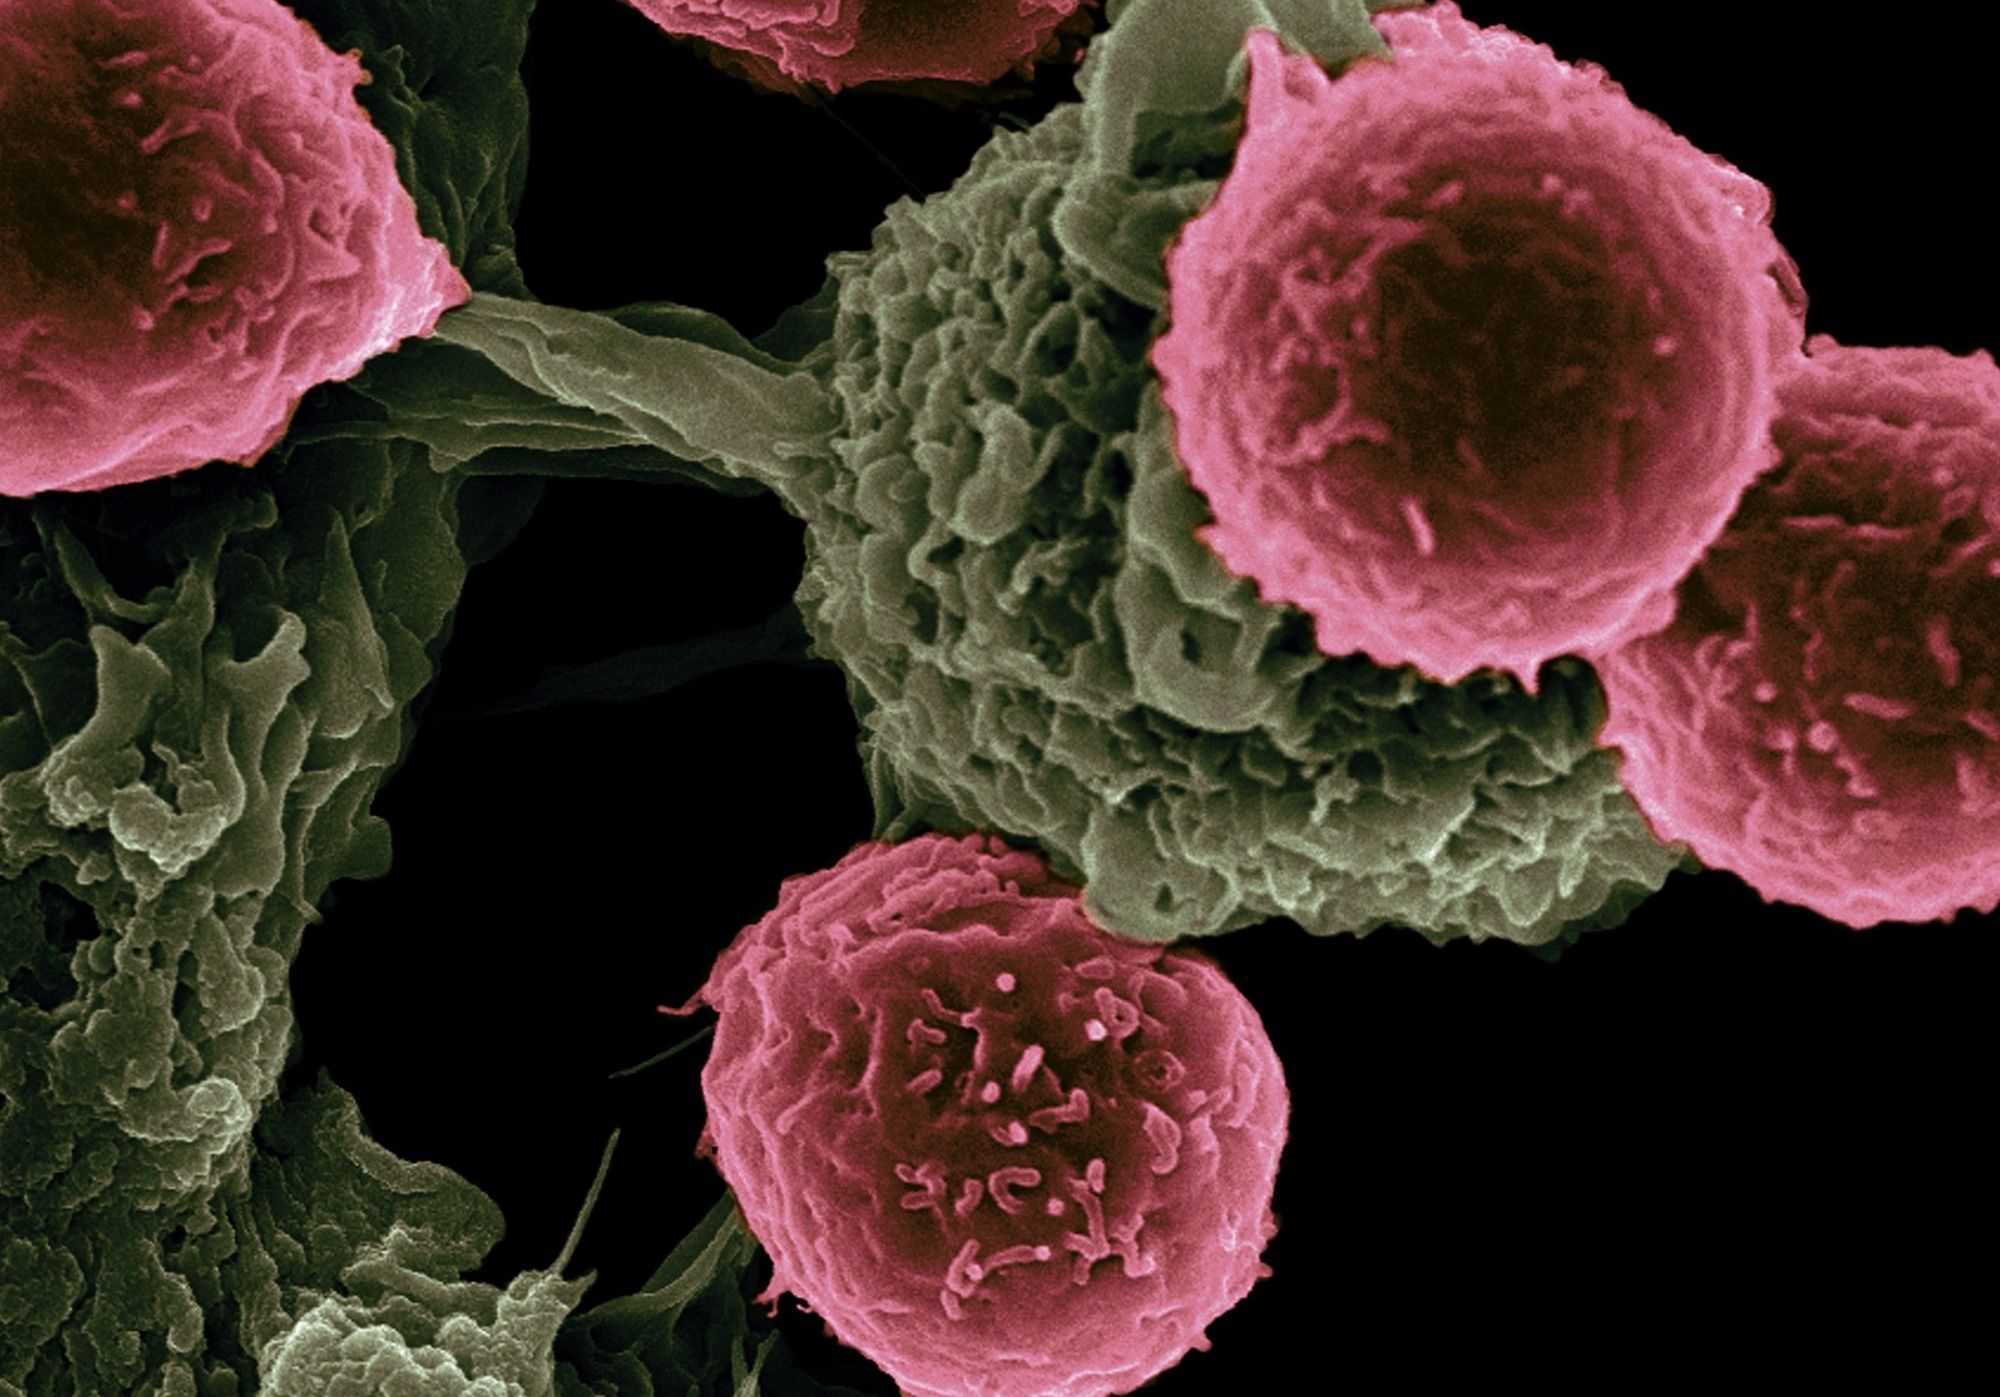 This Japanese Pharmaceutical Company Signed a $5.5 Billion Deal to Develop New Cancer Therapies